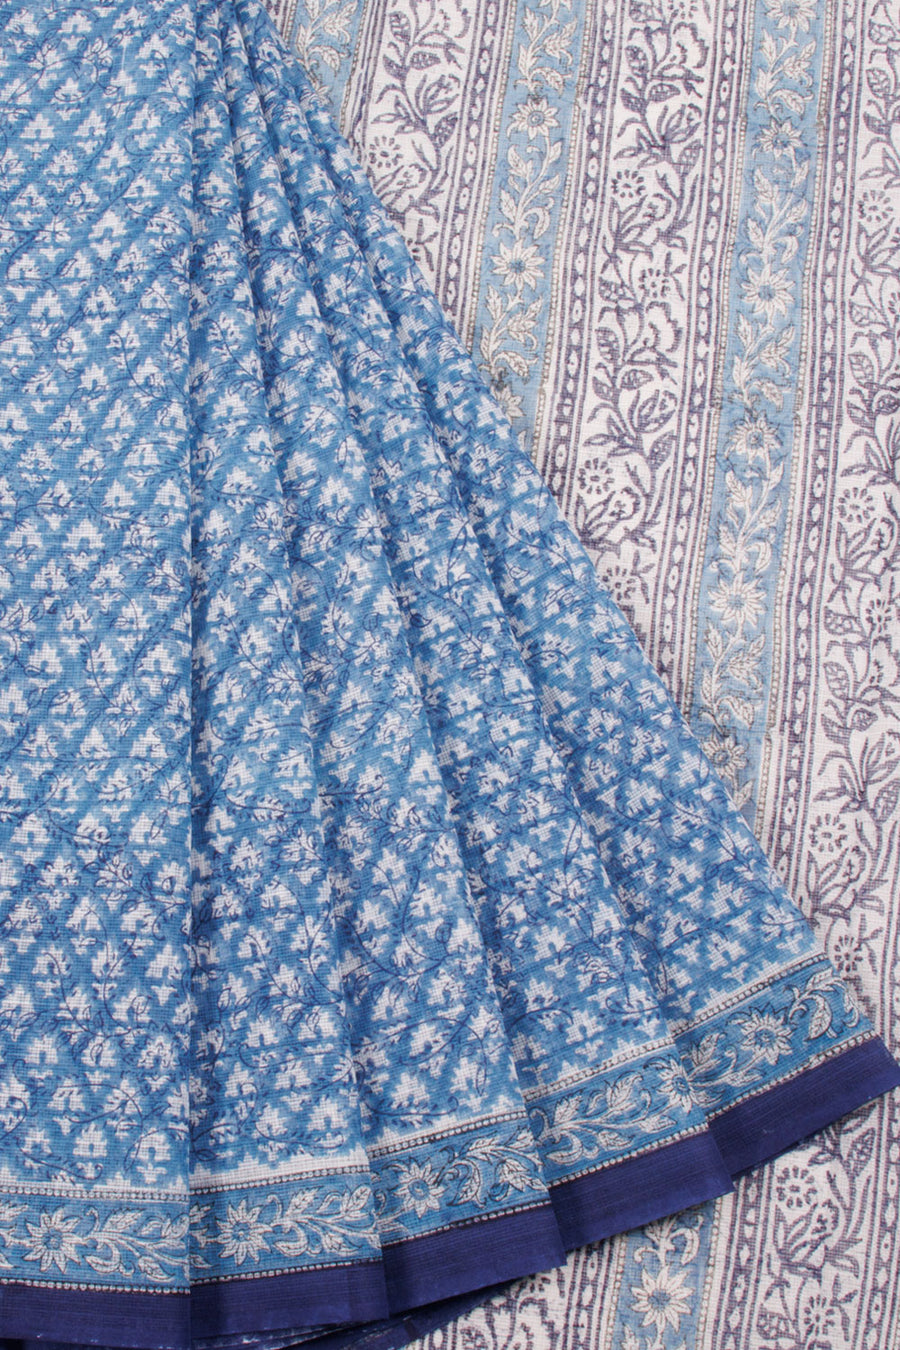 Blue Hand Block Printed Kota Cotton Sarees with allover Floral Designs and Floral Pallu